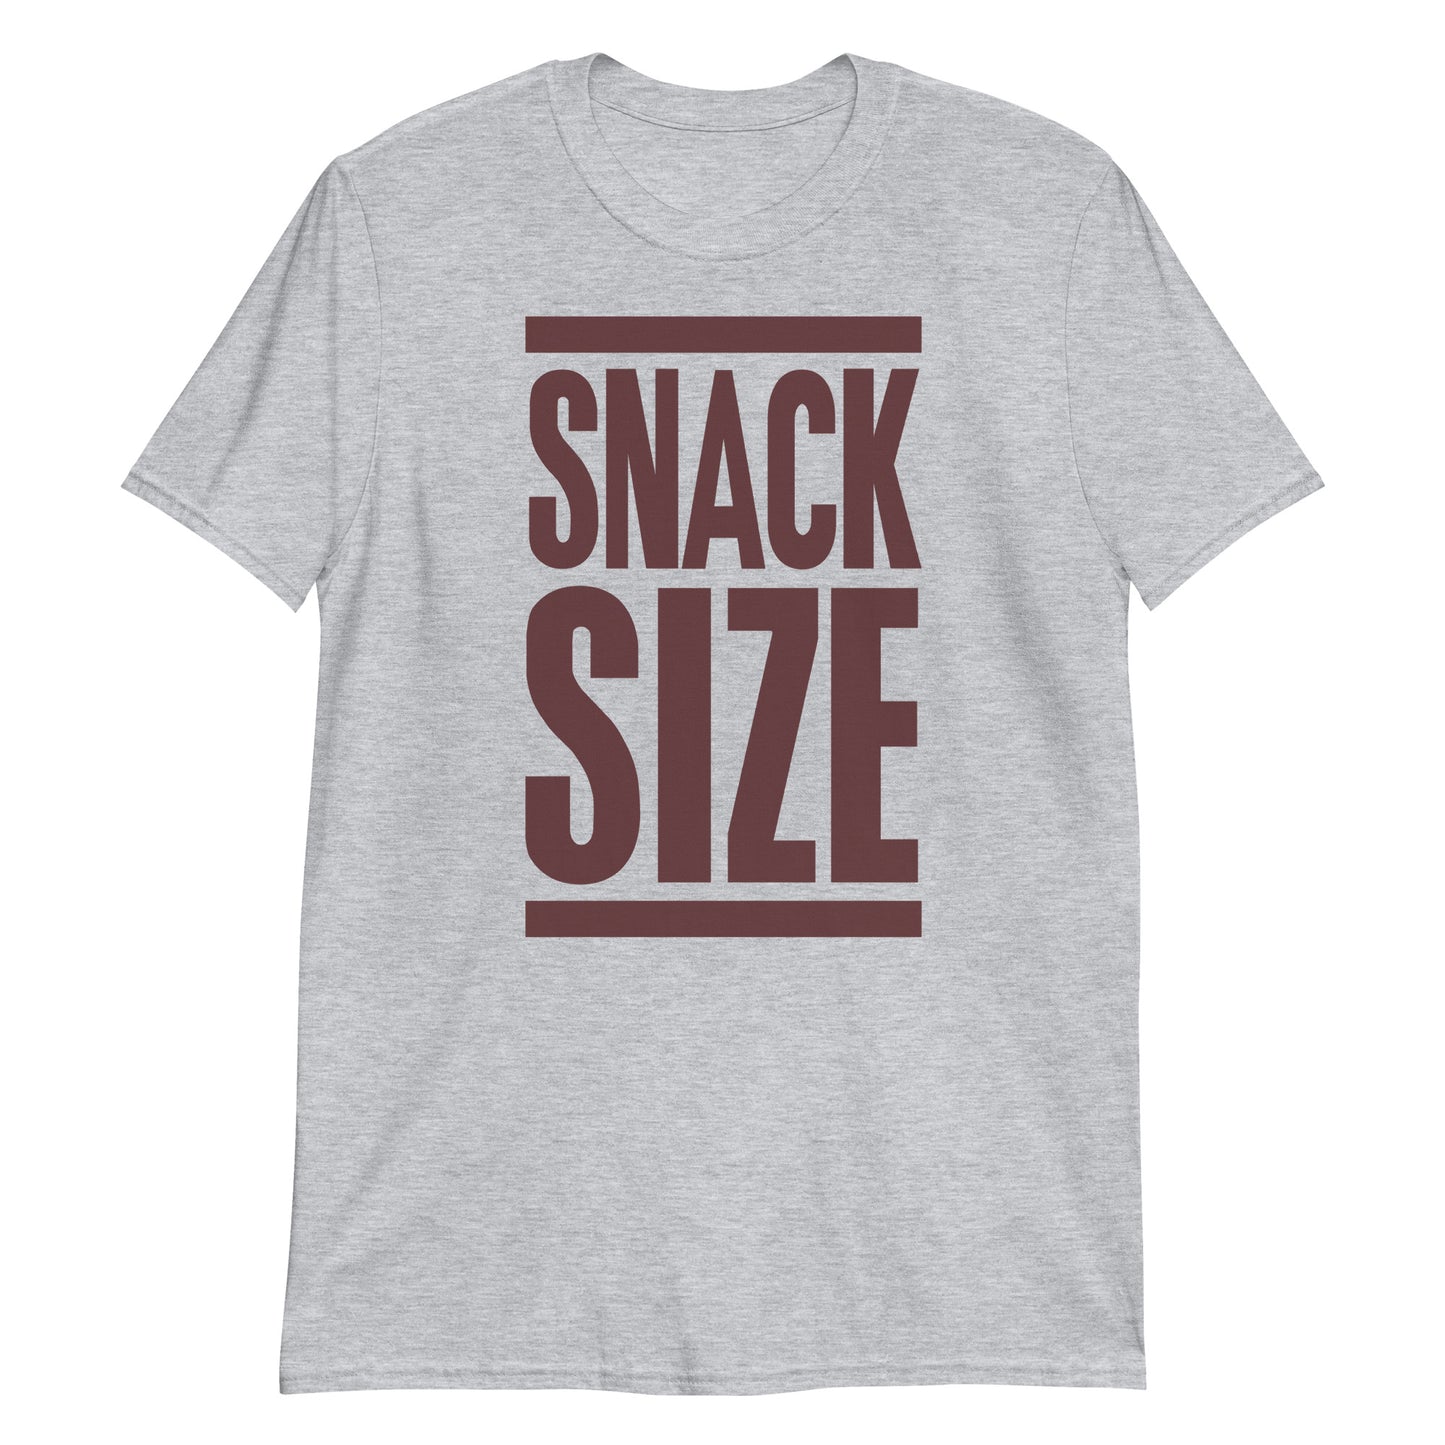 Snack Size t-shirt